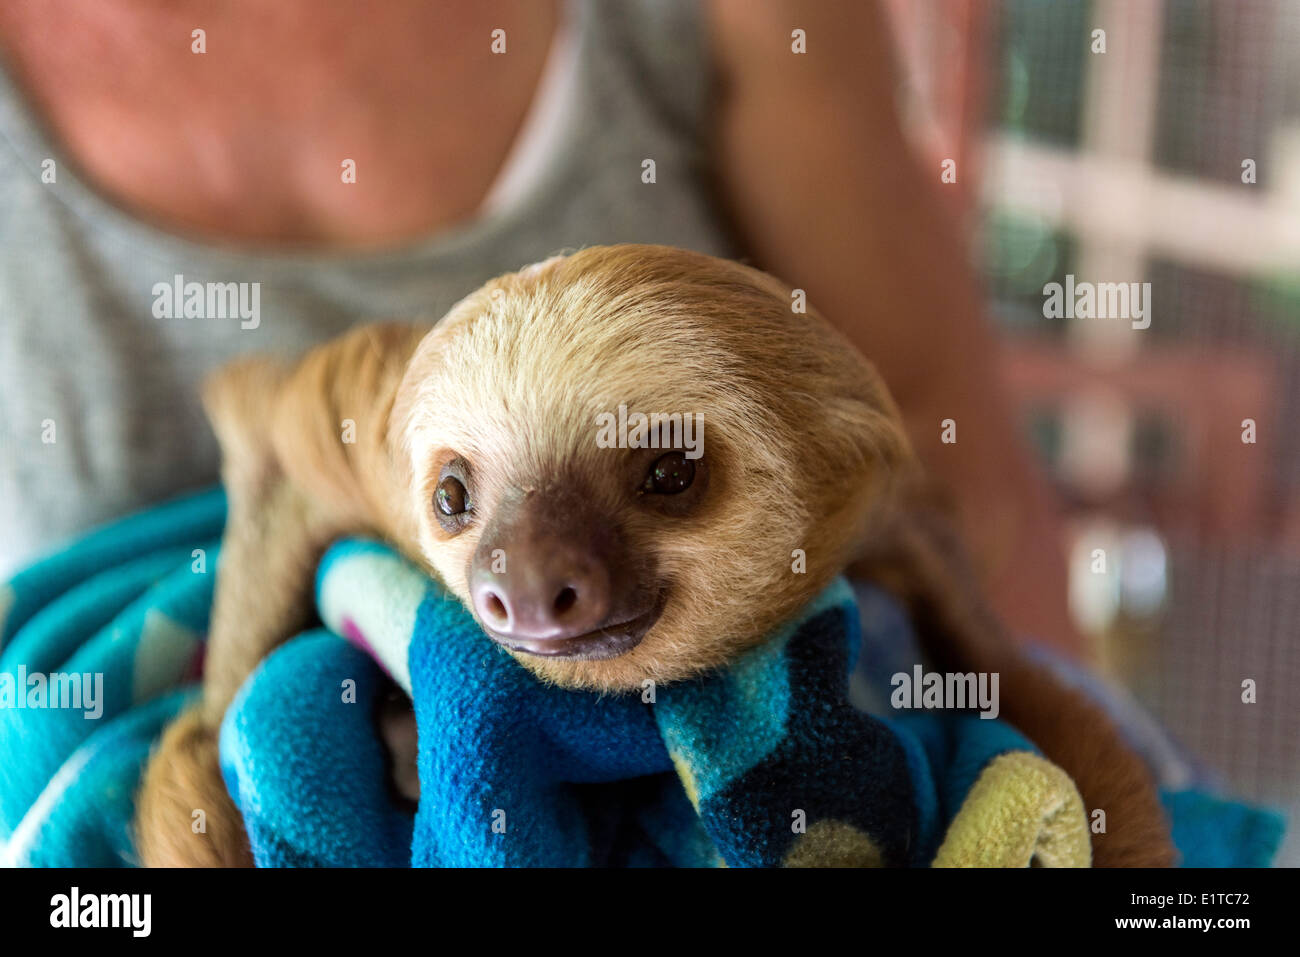 Baby sloth being taken care of by a member of staff at the Jaguar Rescue Center Puerto Viejo Limon Costa Rica Stock Photo